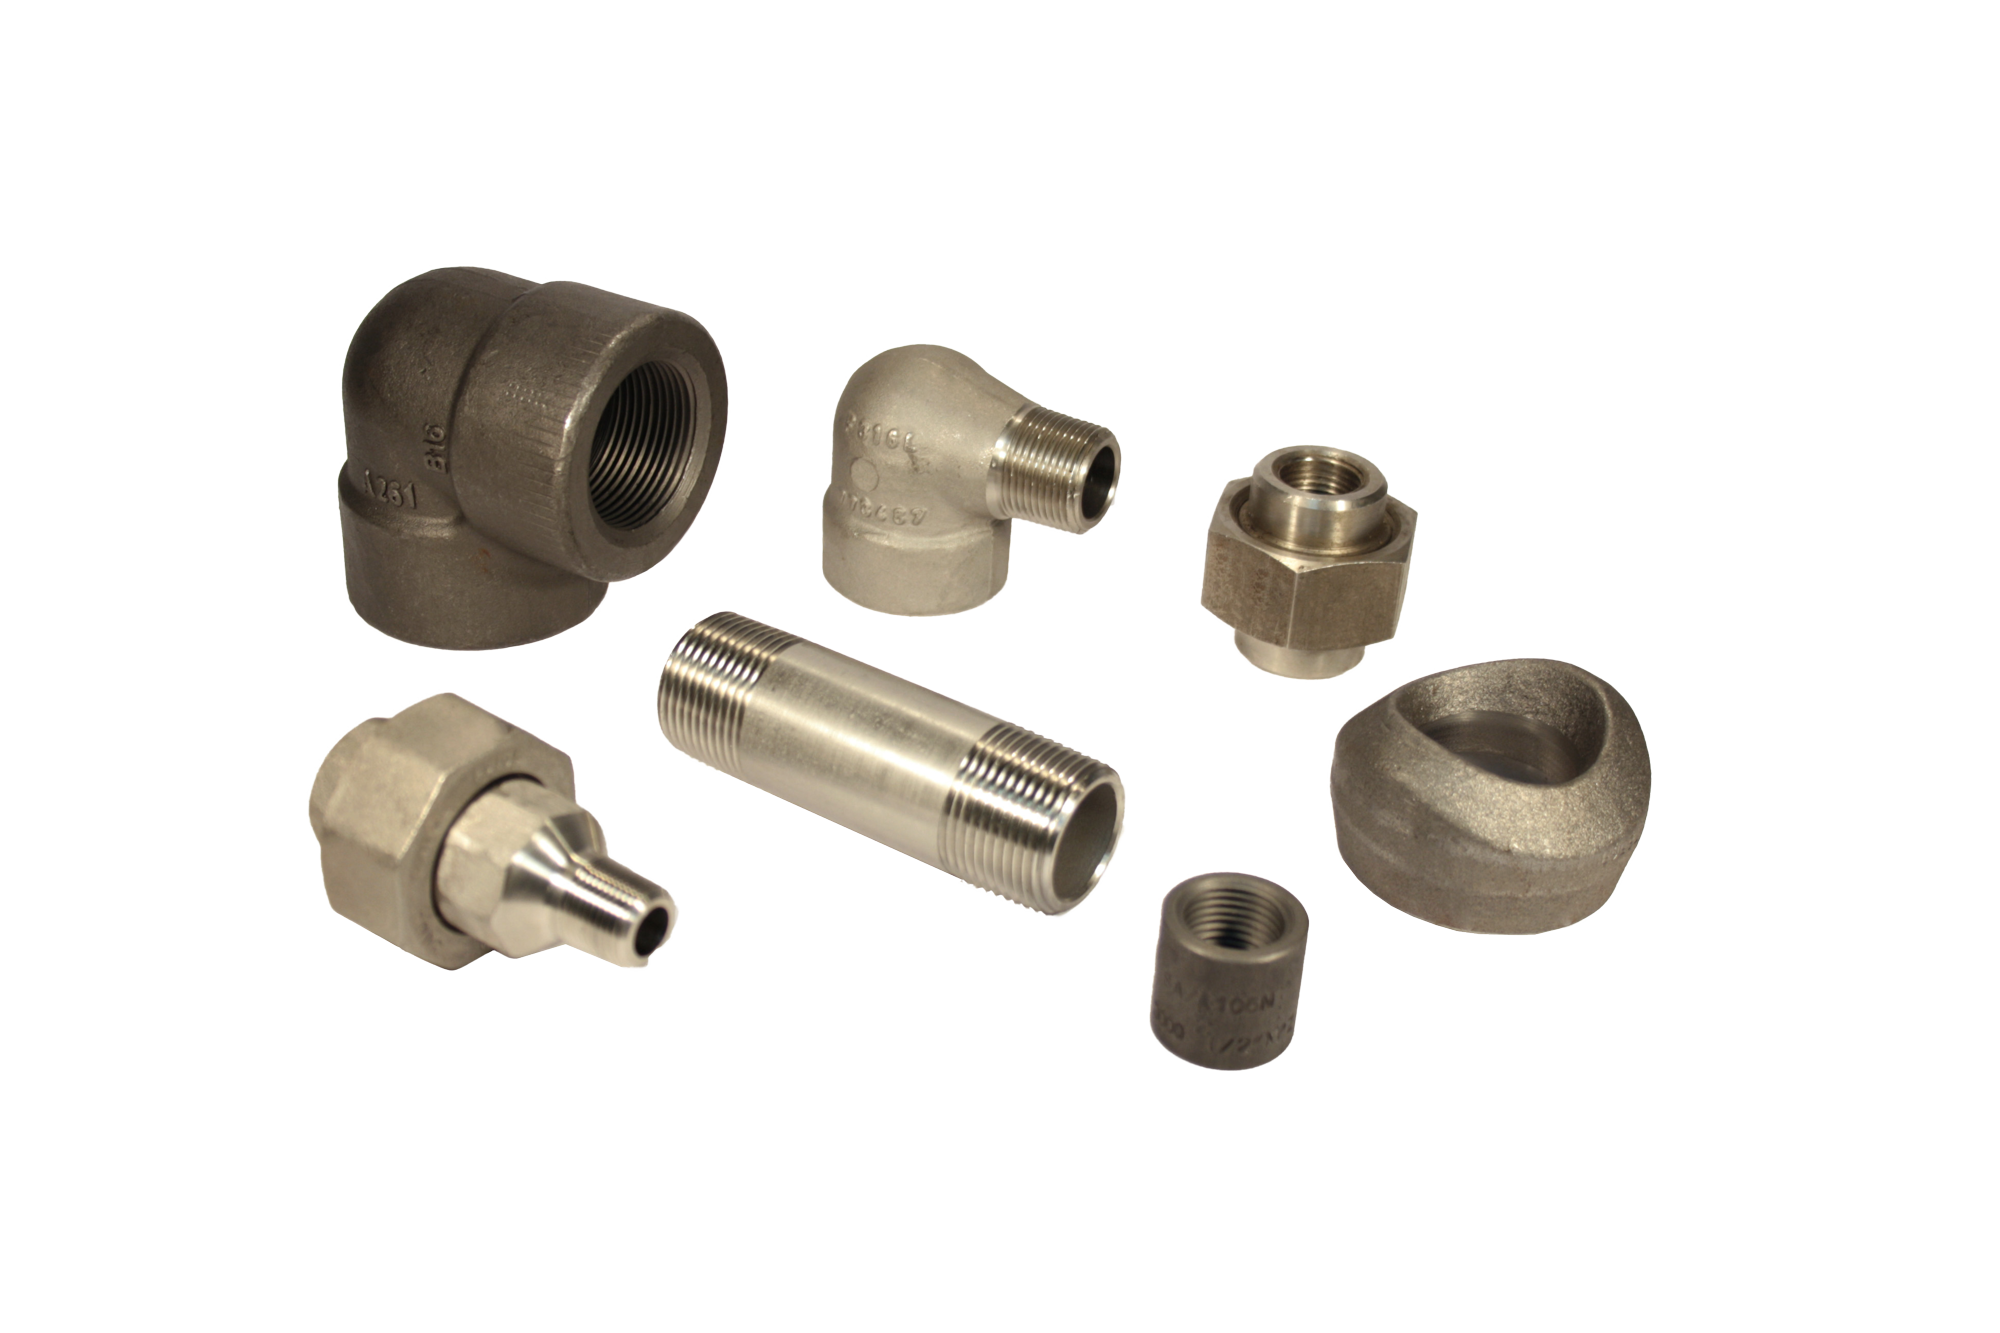 1/2 in. Threaded NPT Union 316/316L 3000# Forged Stainless Steel Pipe  Fitting